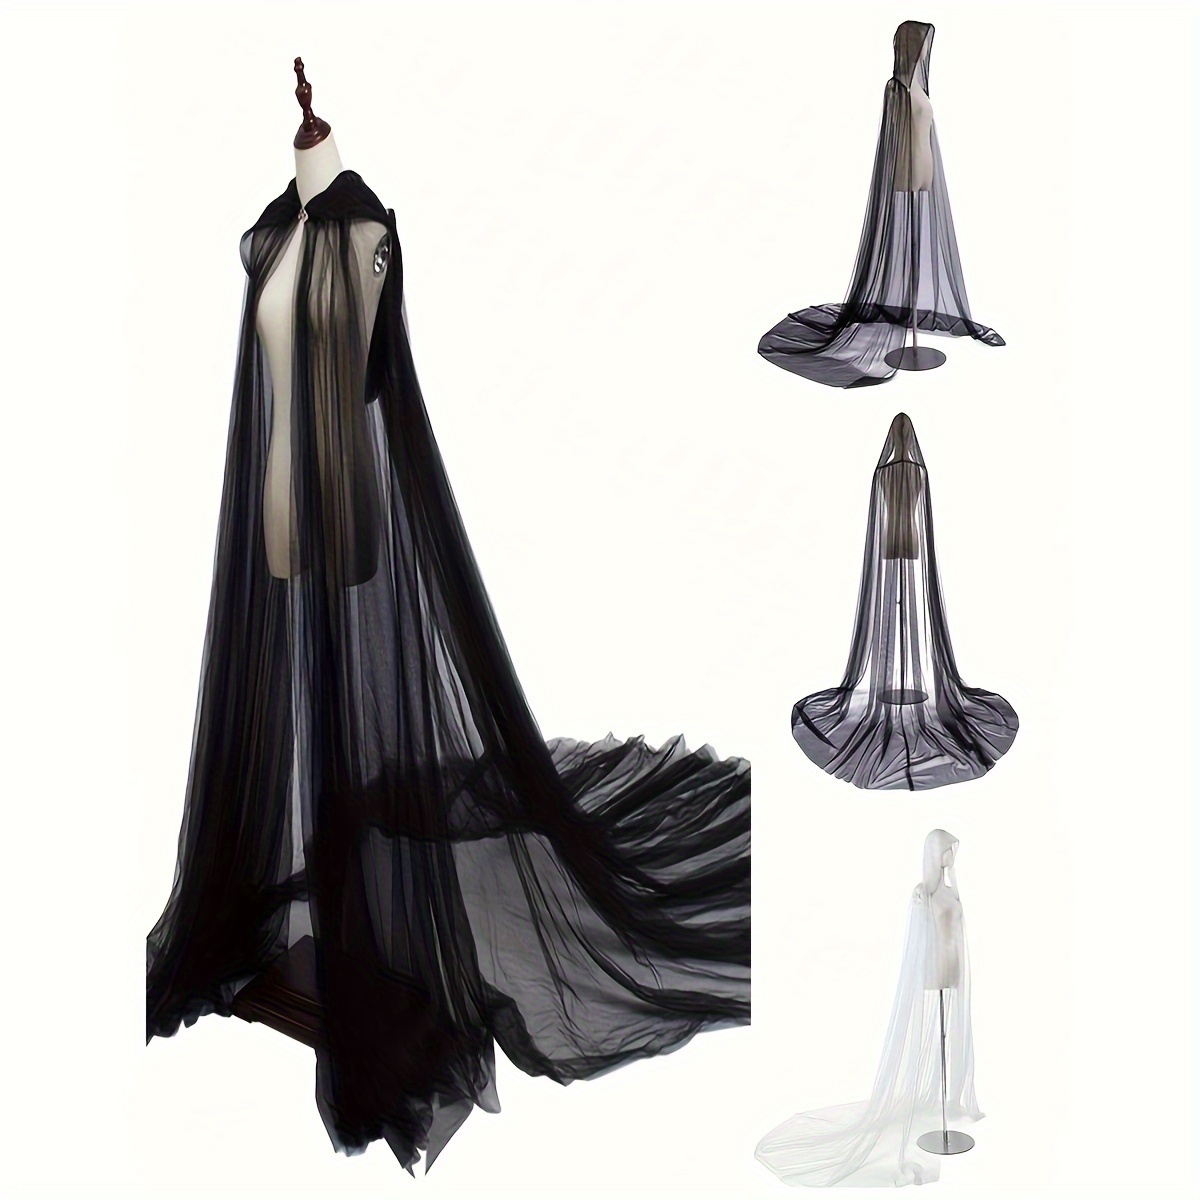 

1pc Elegant Sheer Mesh Solid Color Vintage Cloak With Hood, Romantic Bridal Cape, Ideal For Wedding And Special Occasions